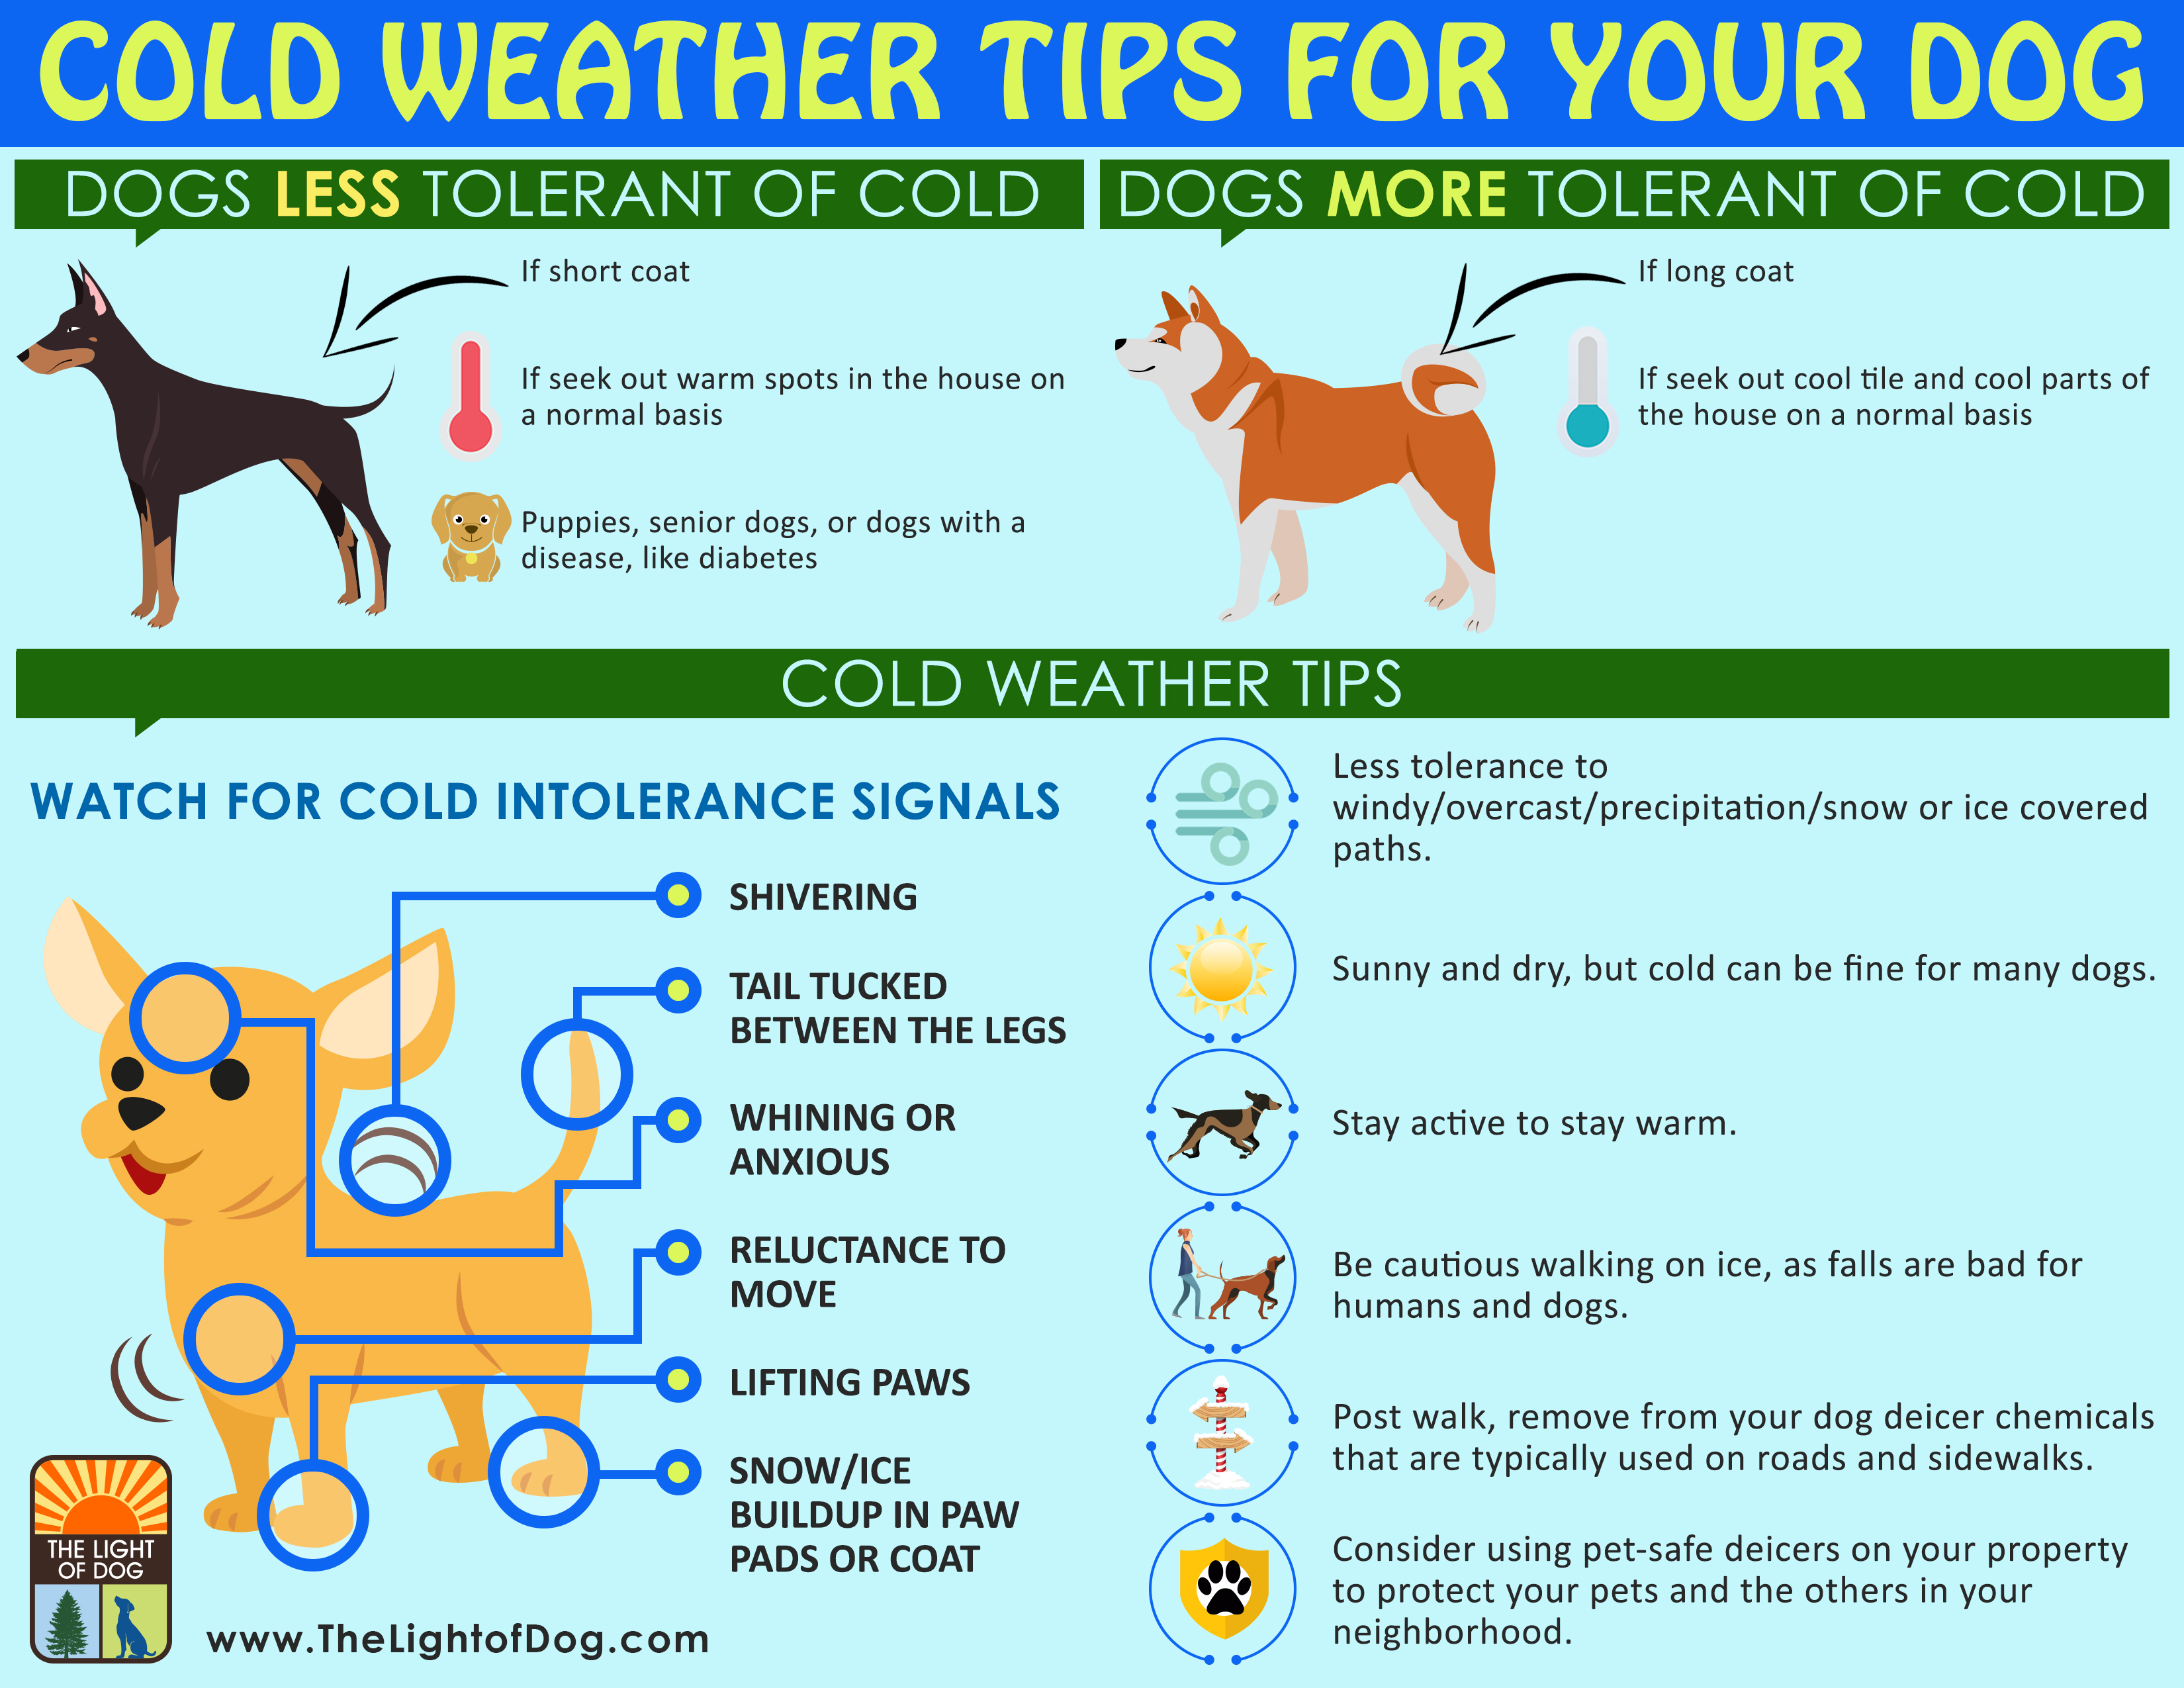 Cold weather tips for your dog